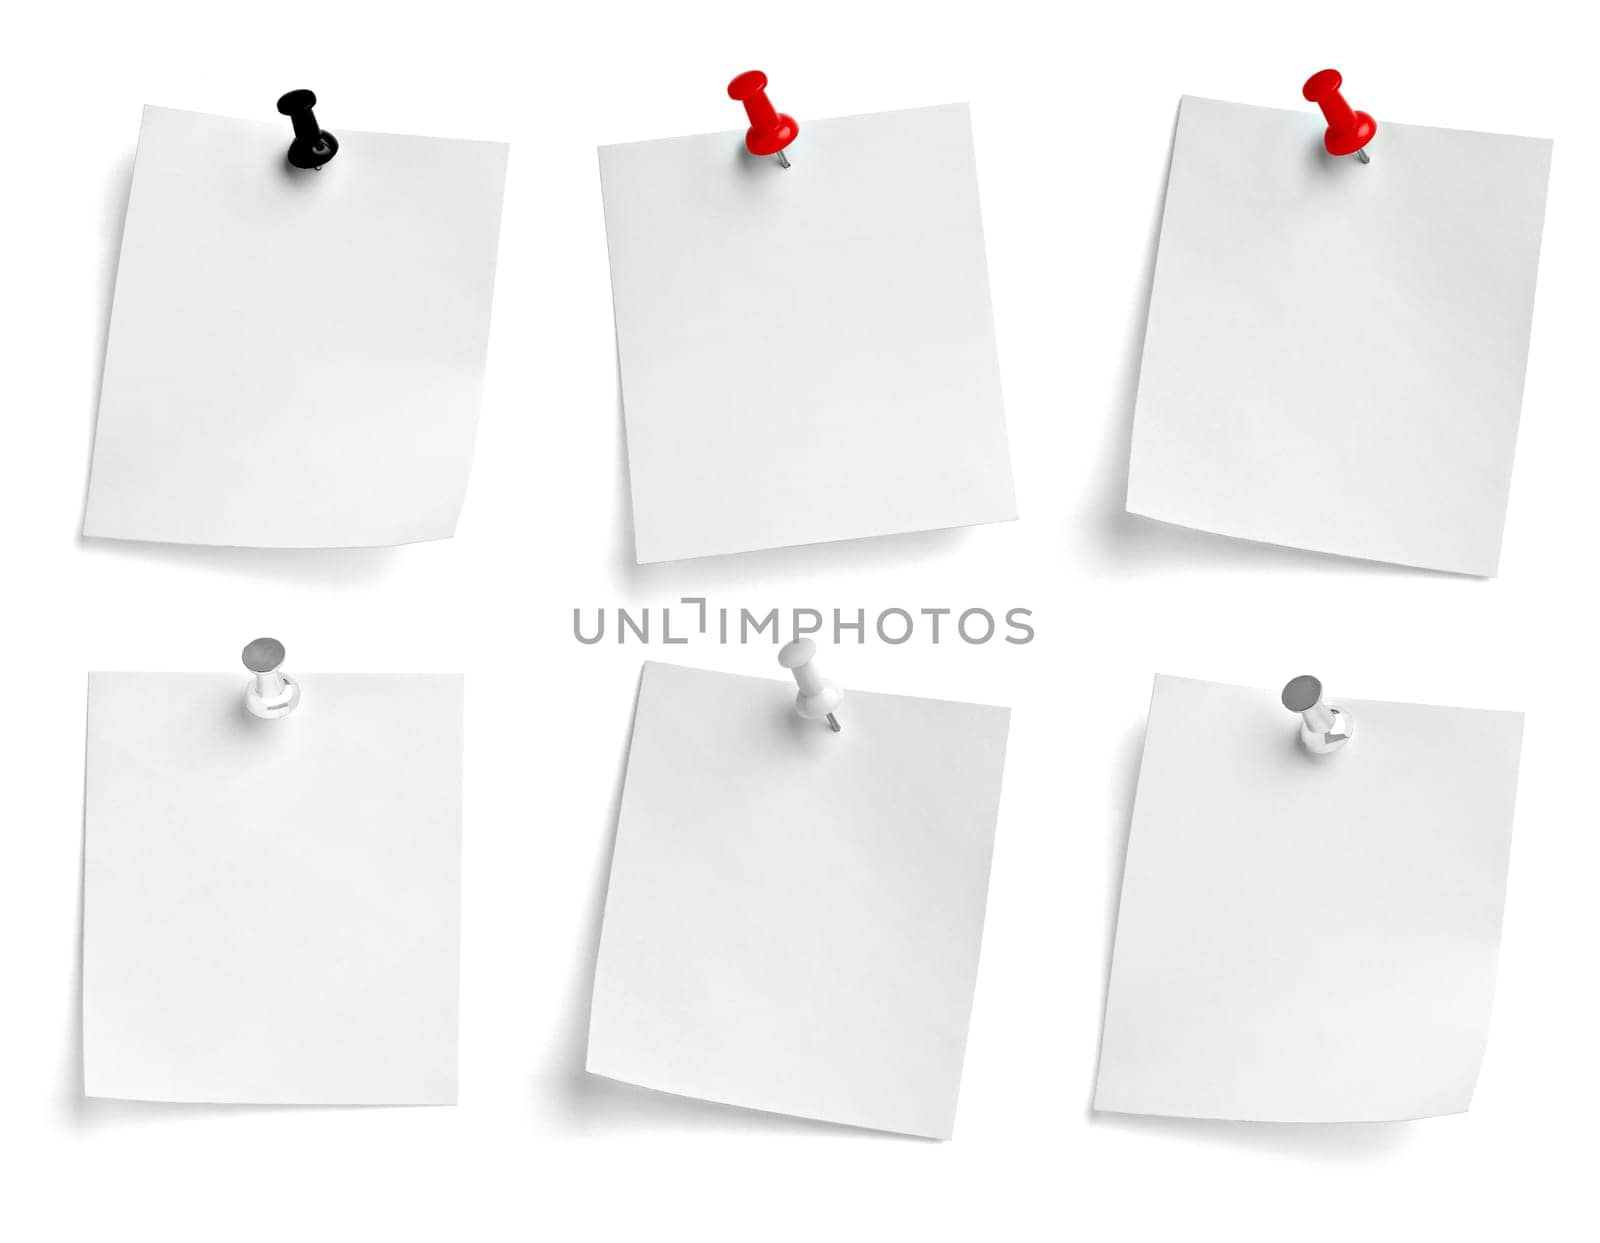 note paper push pin message red white black by Picsfive